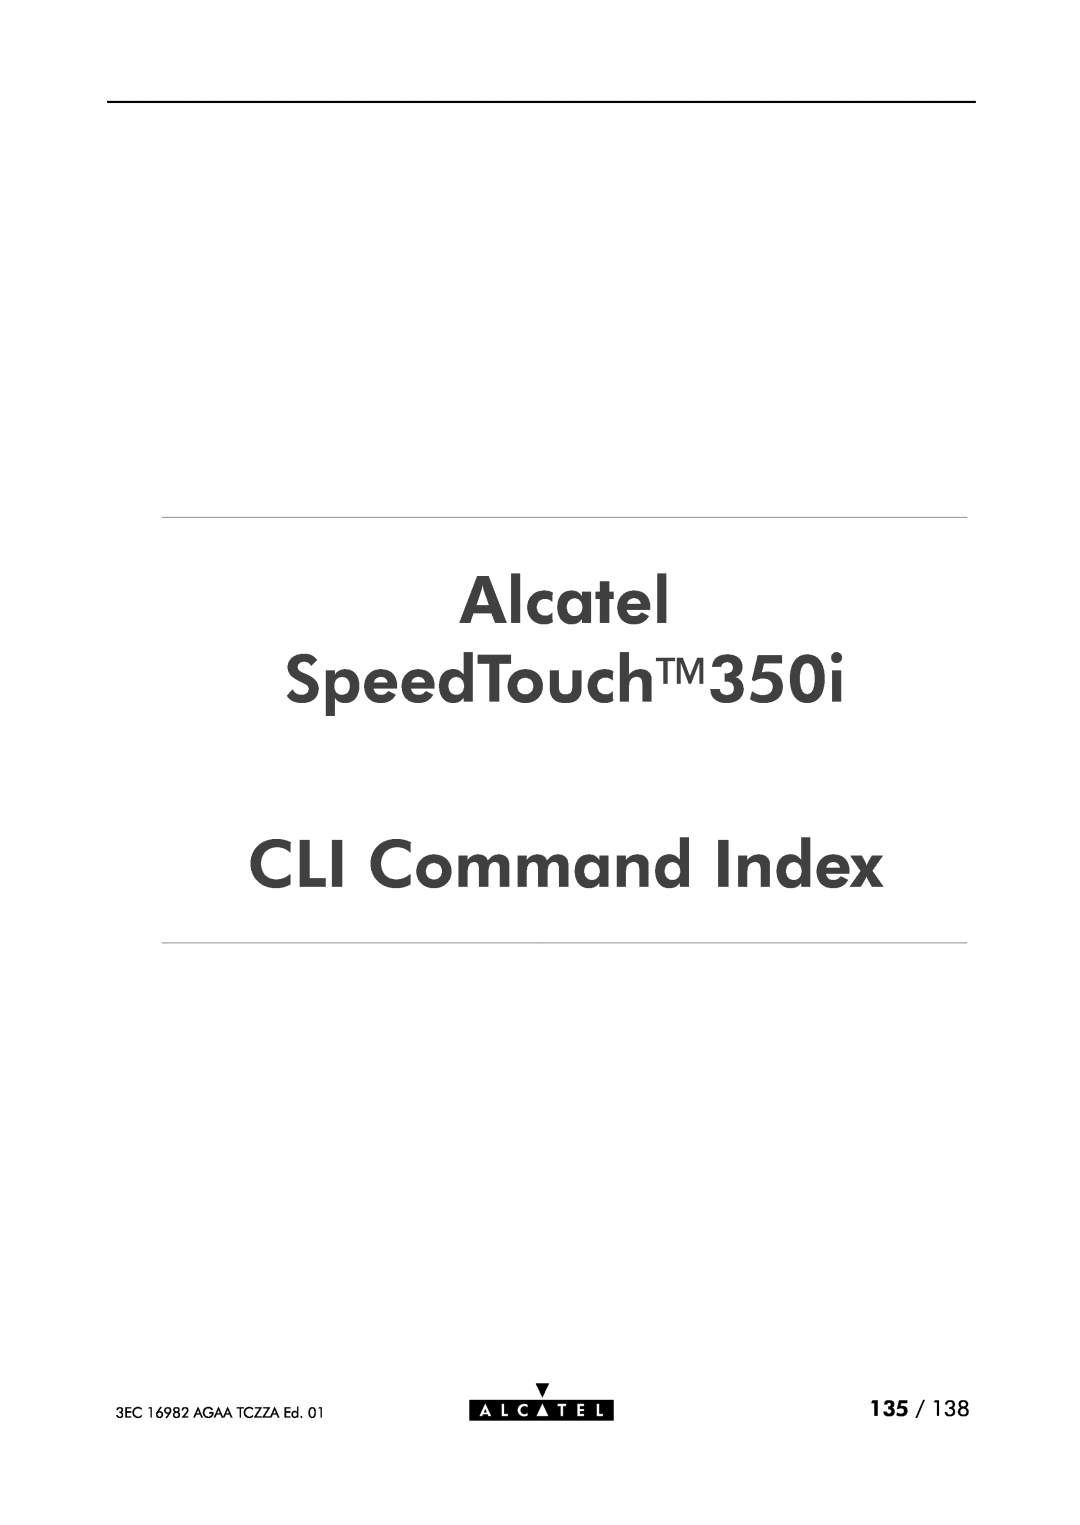 Alcatel Carrier Internetworking Solutions 350I manual Alcatel SpeedTouch CLI Command Index, 3EC 16982 AGAA TCZZA Ed 